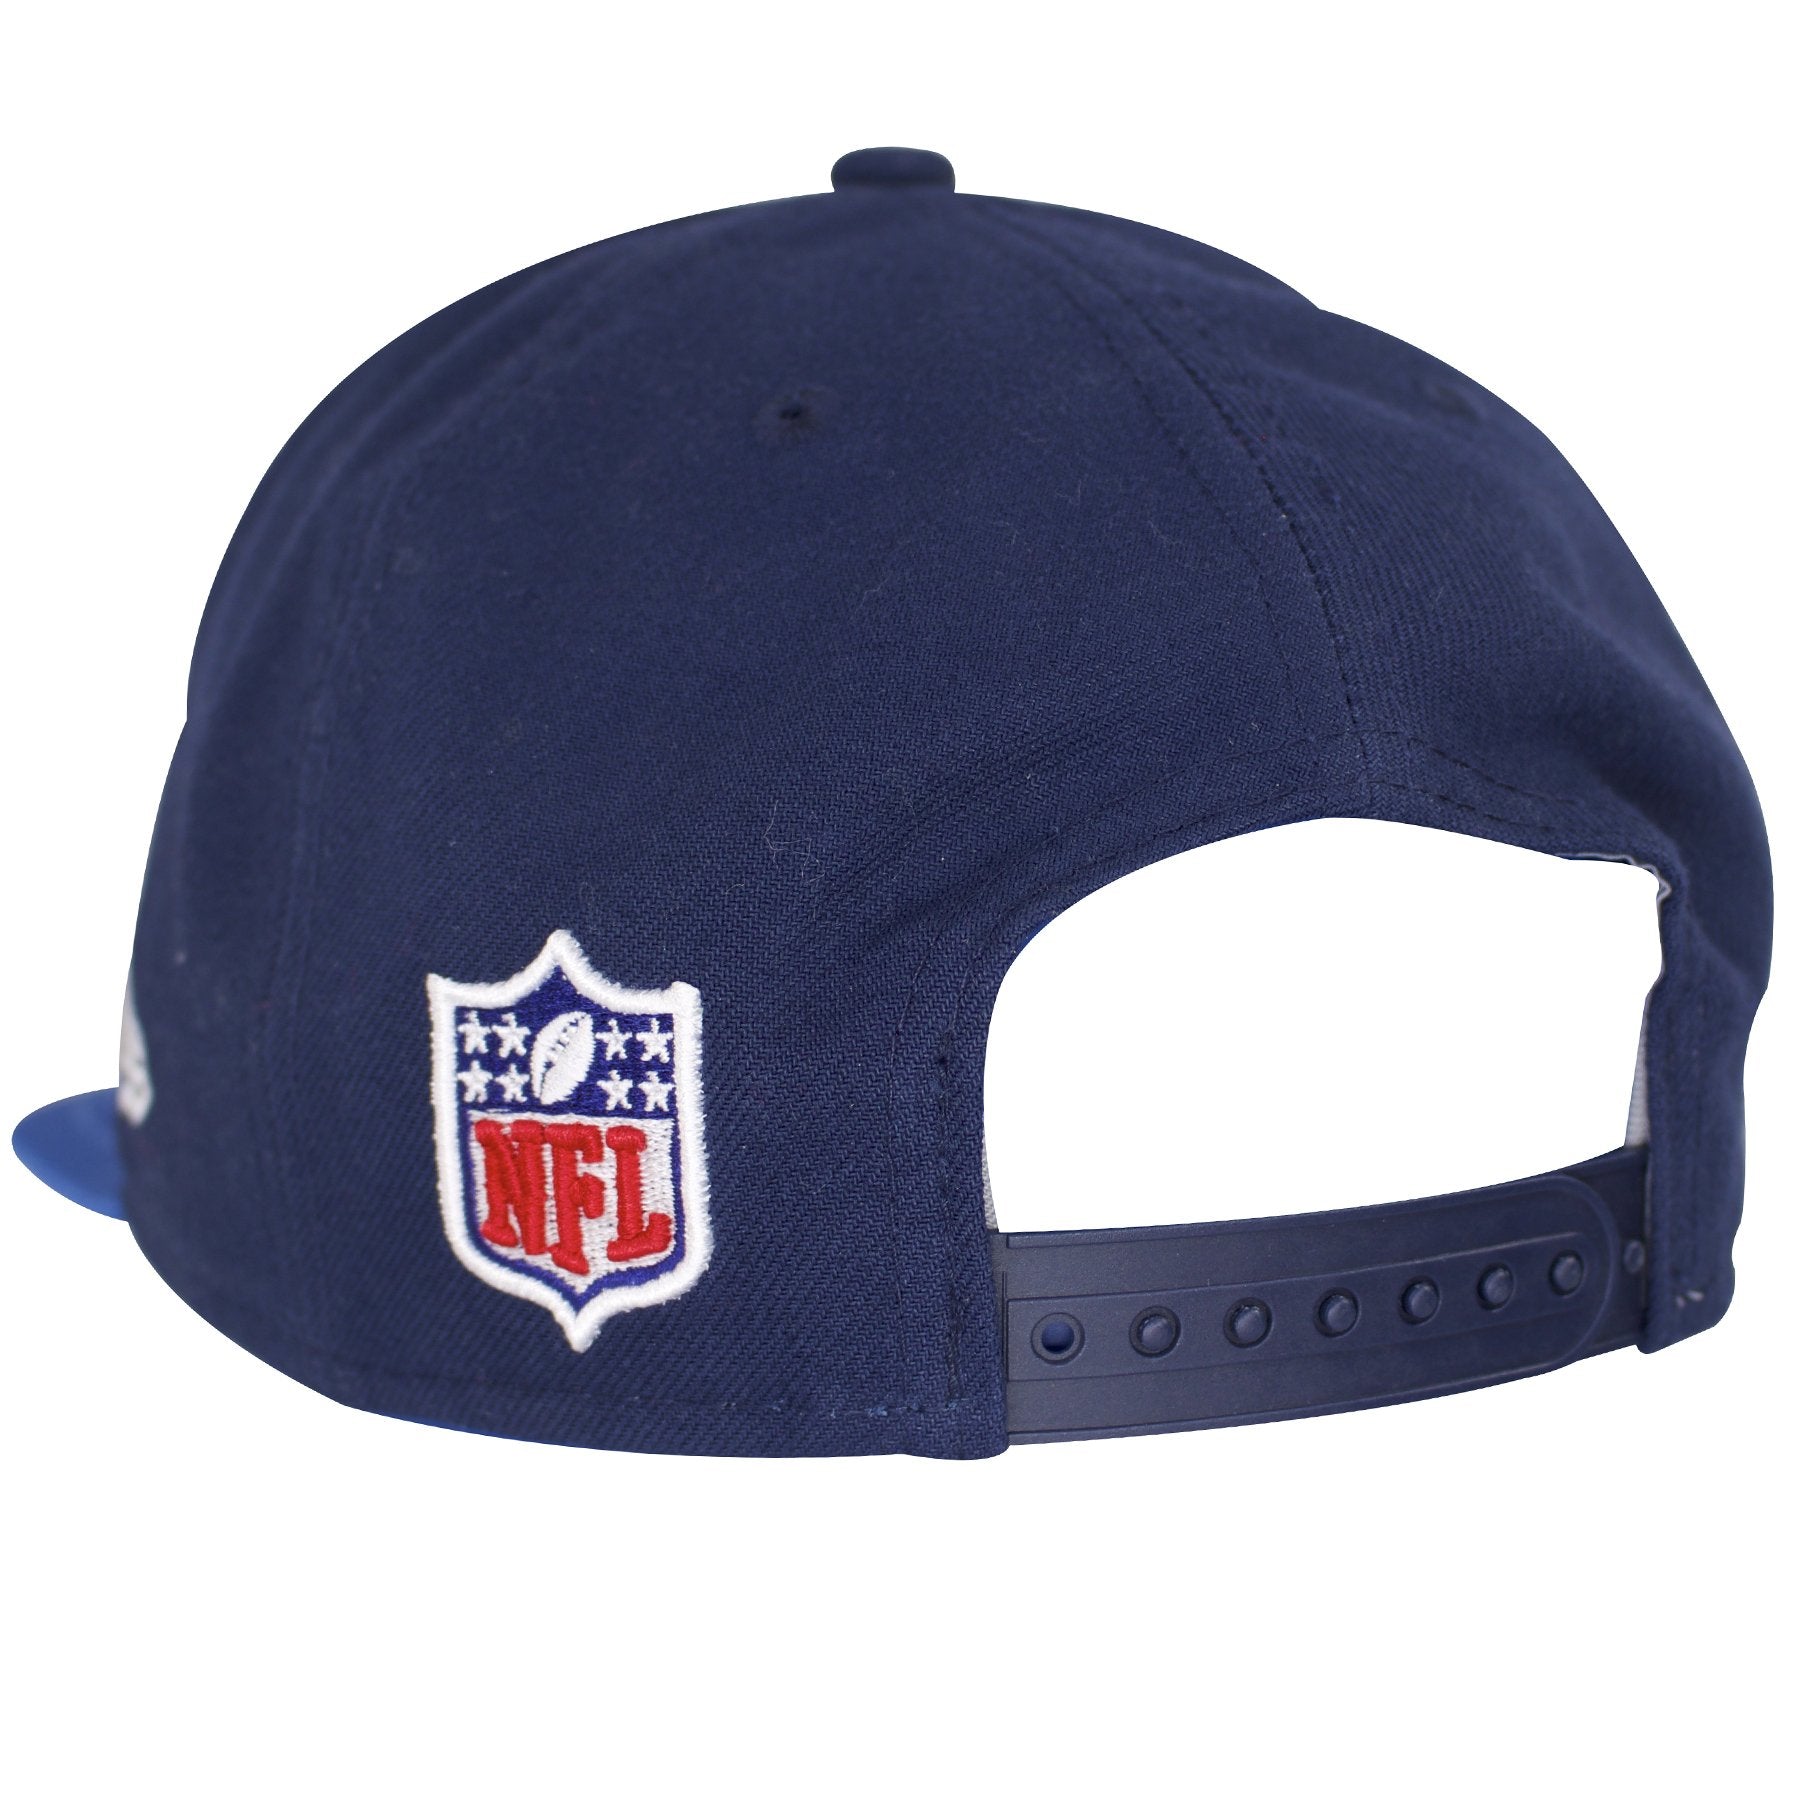 San Diego Chargers 2016 NFL Sideline Snapback Hat – Cap Swag